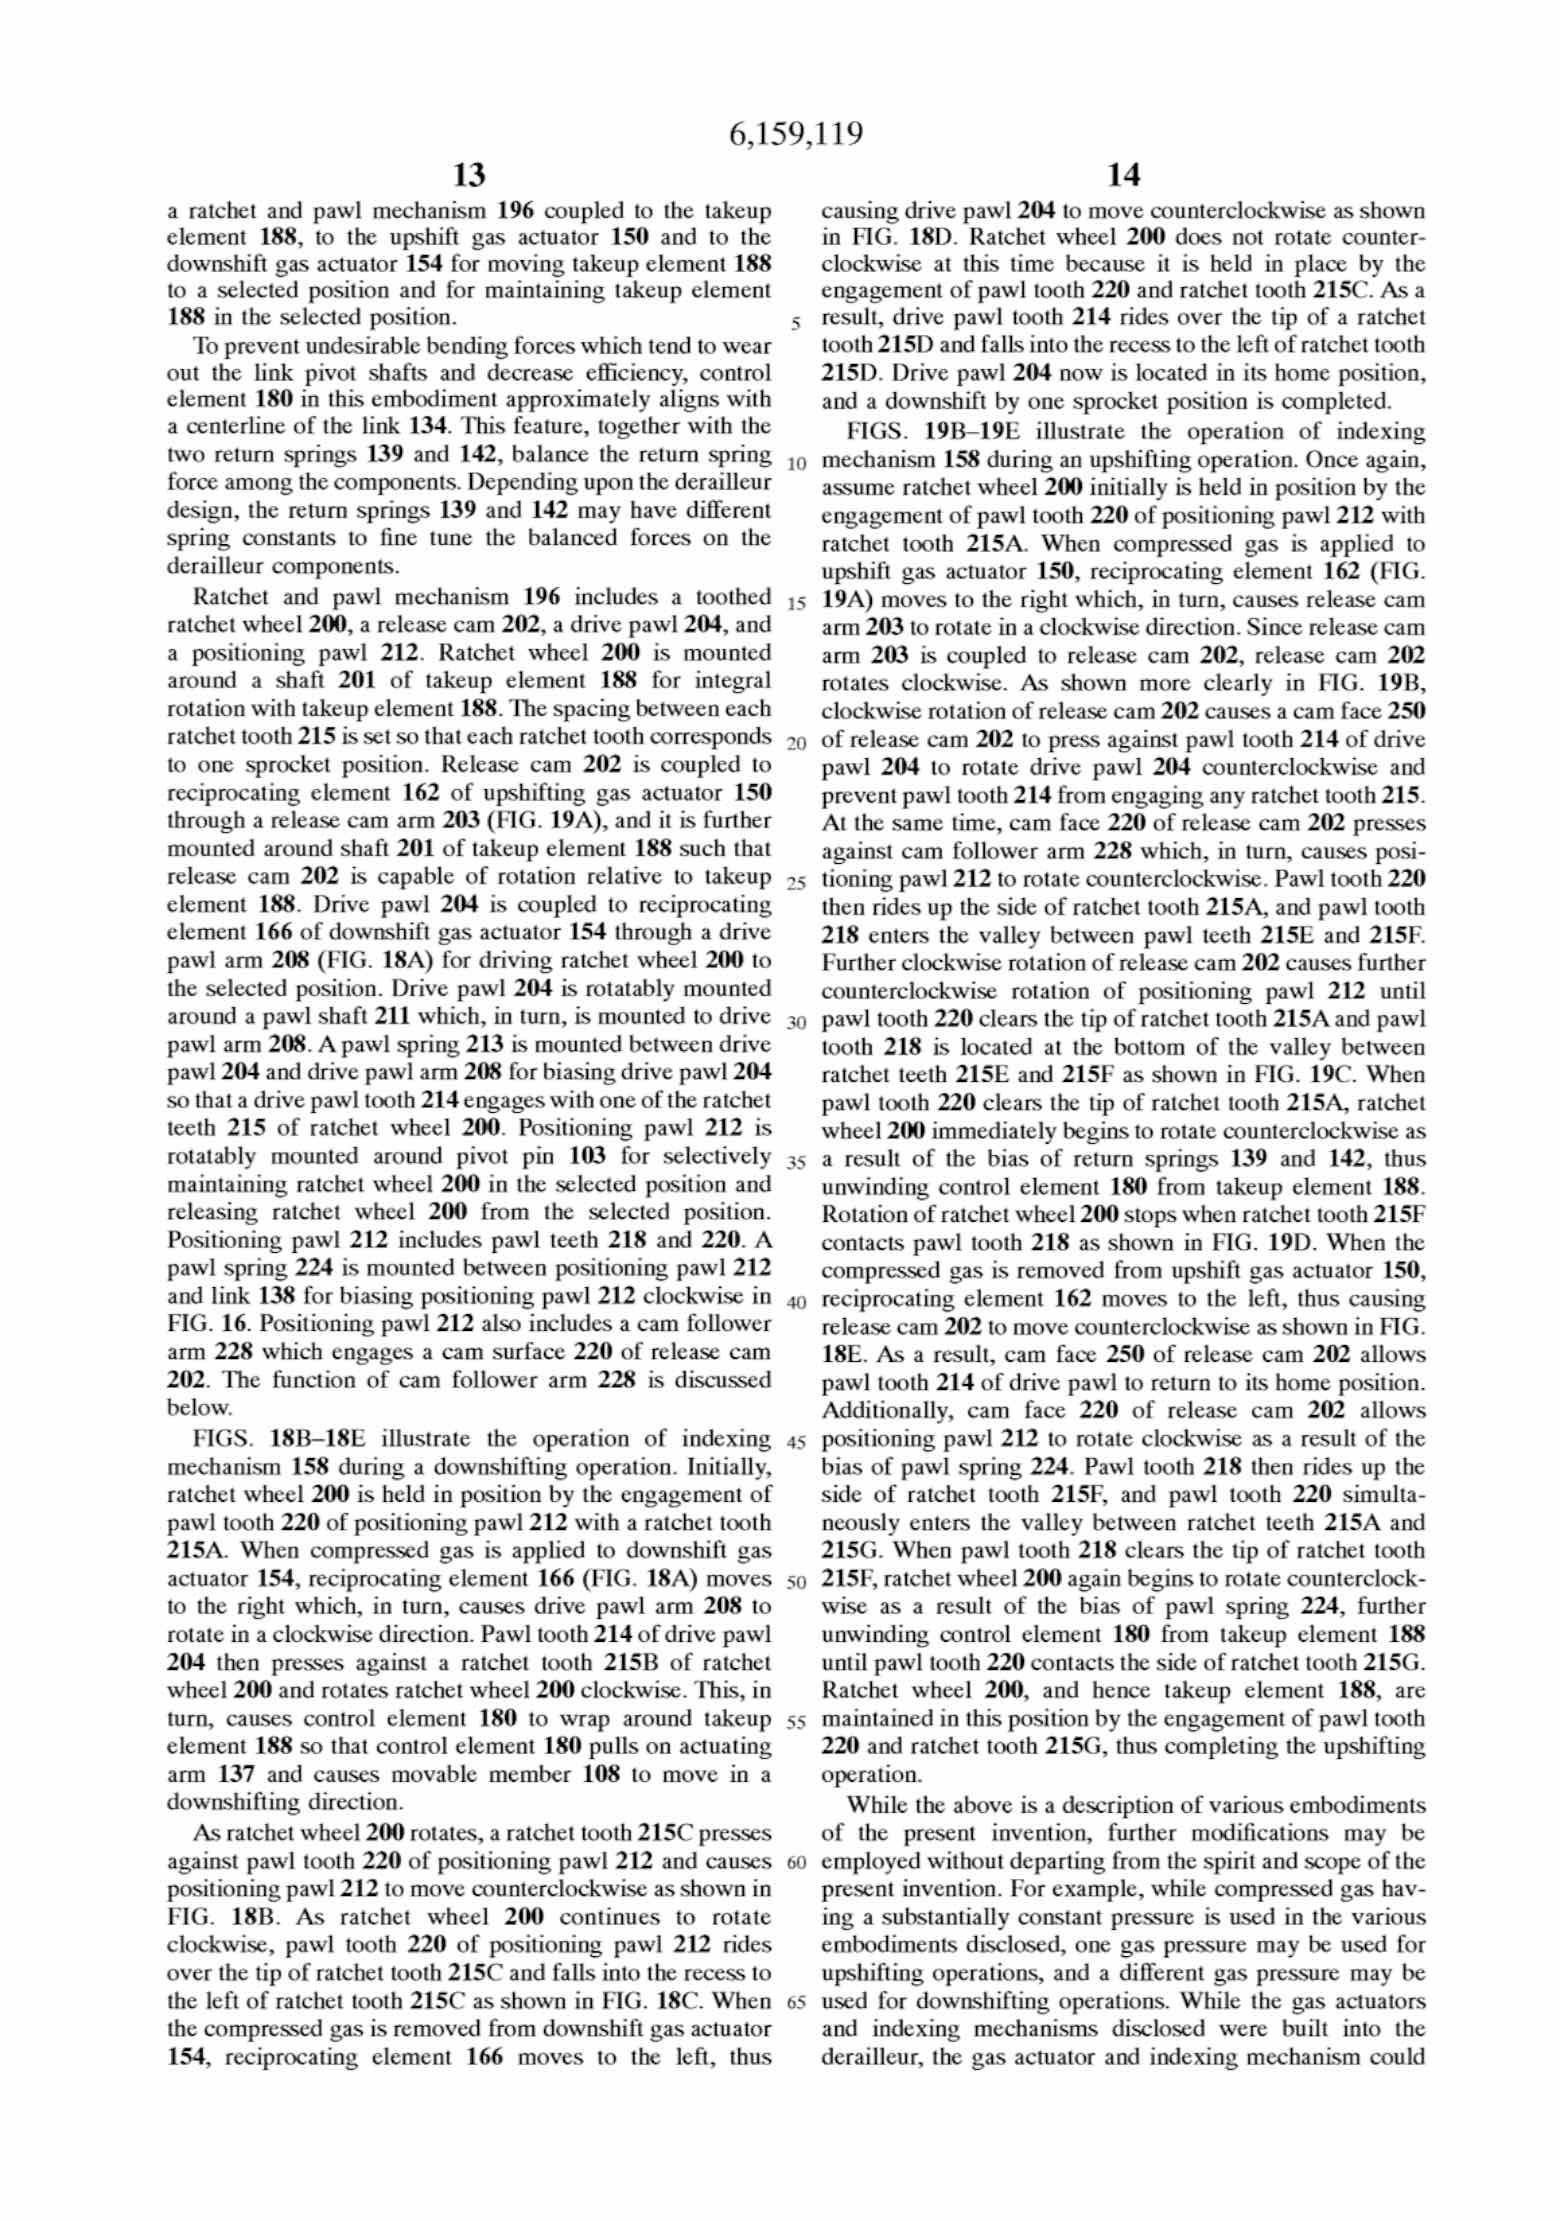 US Patent 6,159,119 - Shimano AirLines scan 25 main image